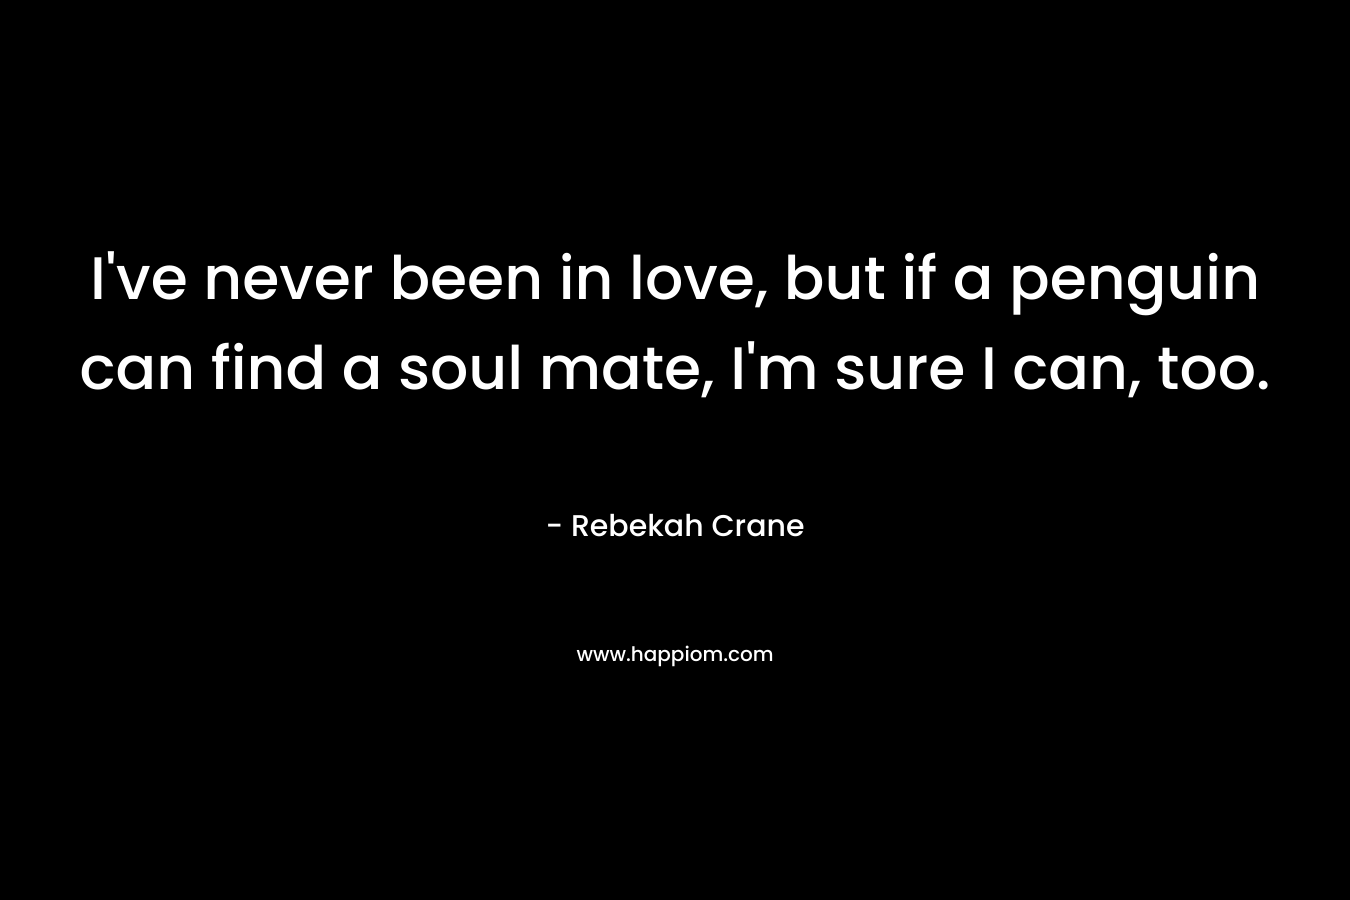 I’ve never been in love, but if a penguin can find a soul mate, I’m sure I can, too. – Rebekah Crane